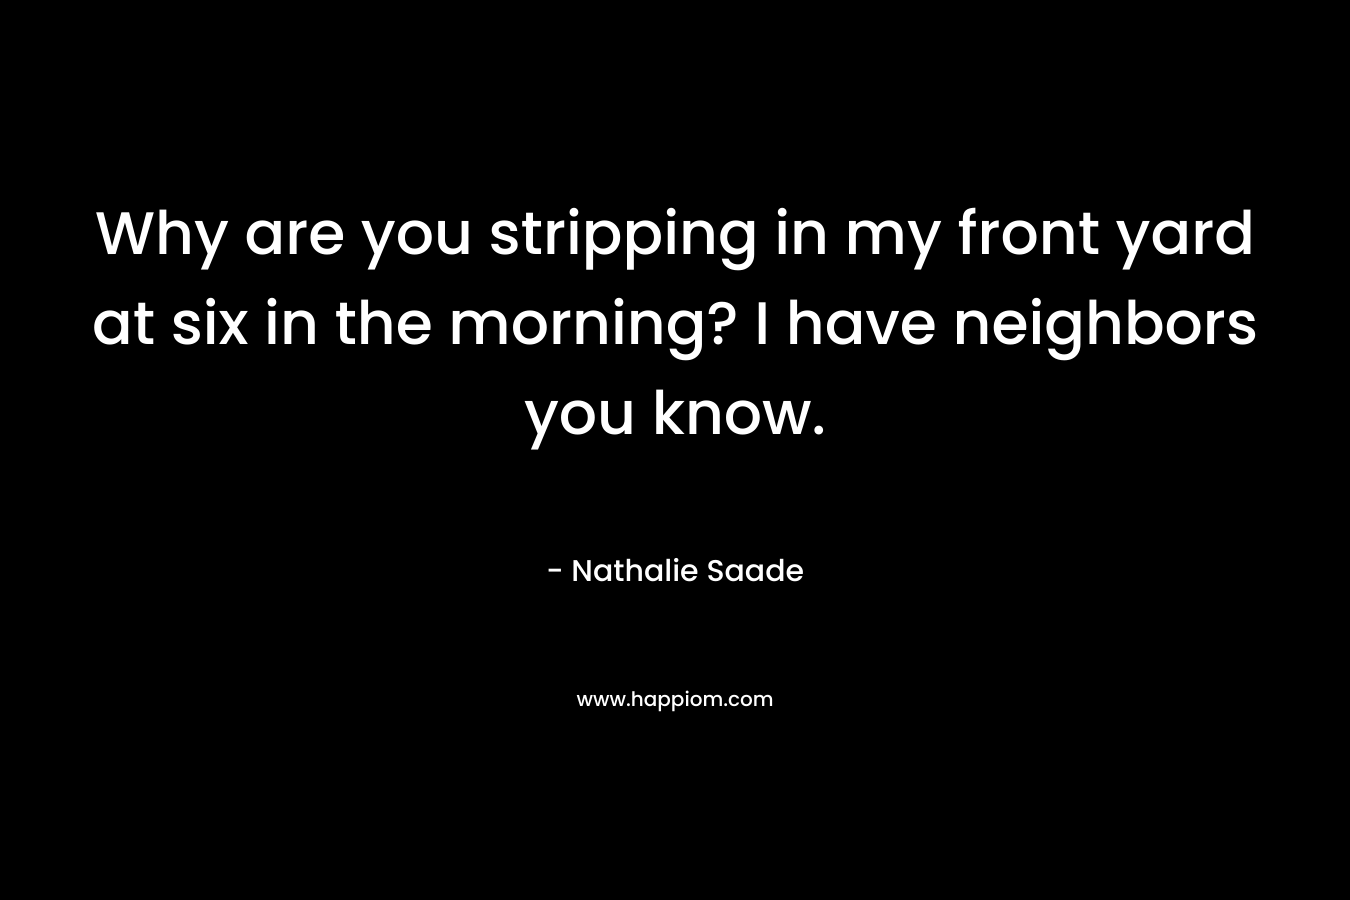 Why are you stripping in my front yard at six in the morning? I have neighbors you know. – Nathalie Saade